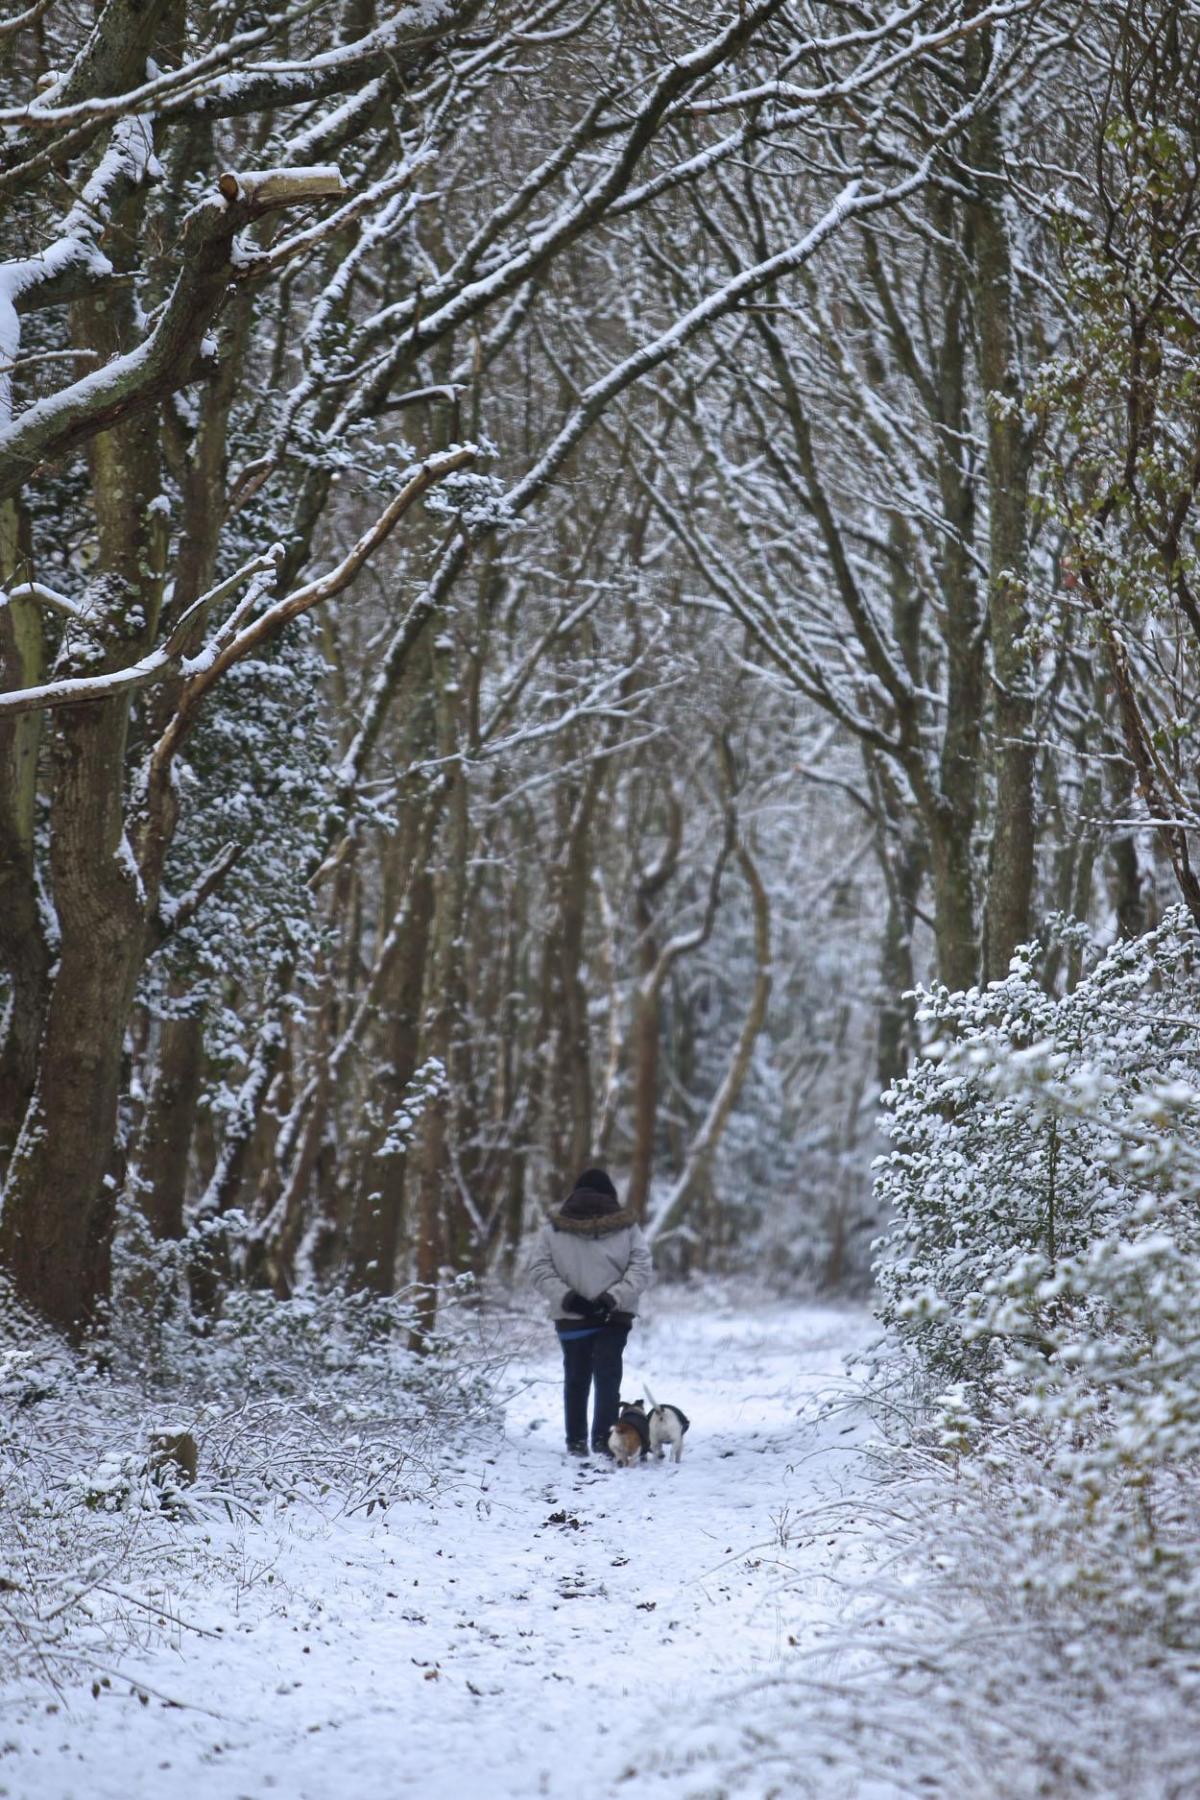 Pictures of snow taken on 3 February, 2015.A dog walker walking in the snow in Upton. Picture by Sam Sheldon